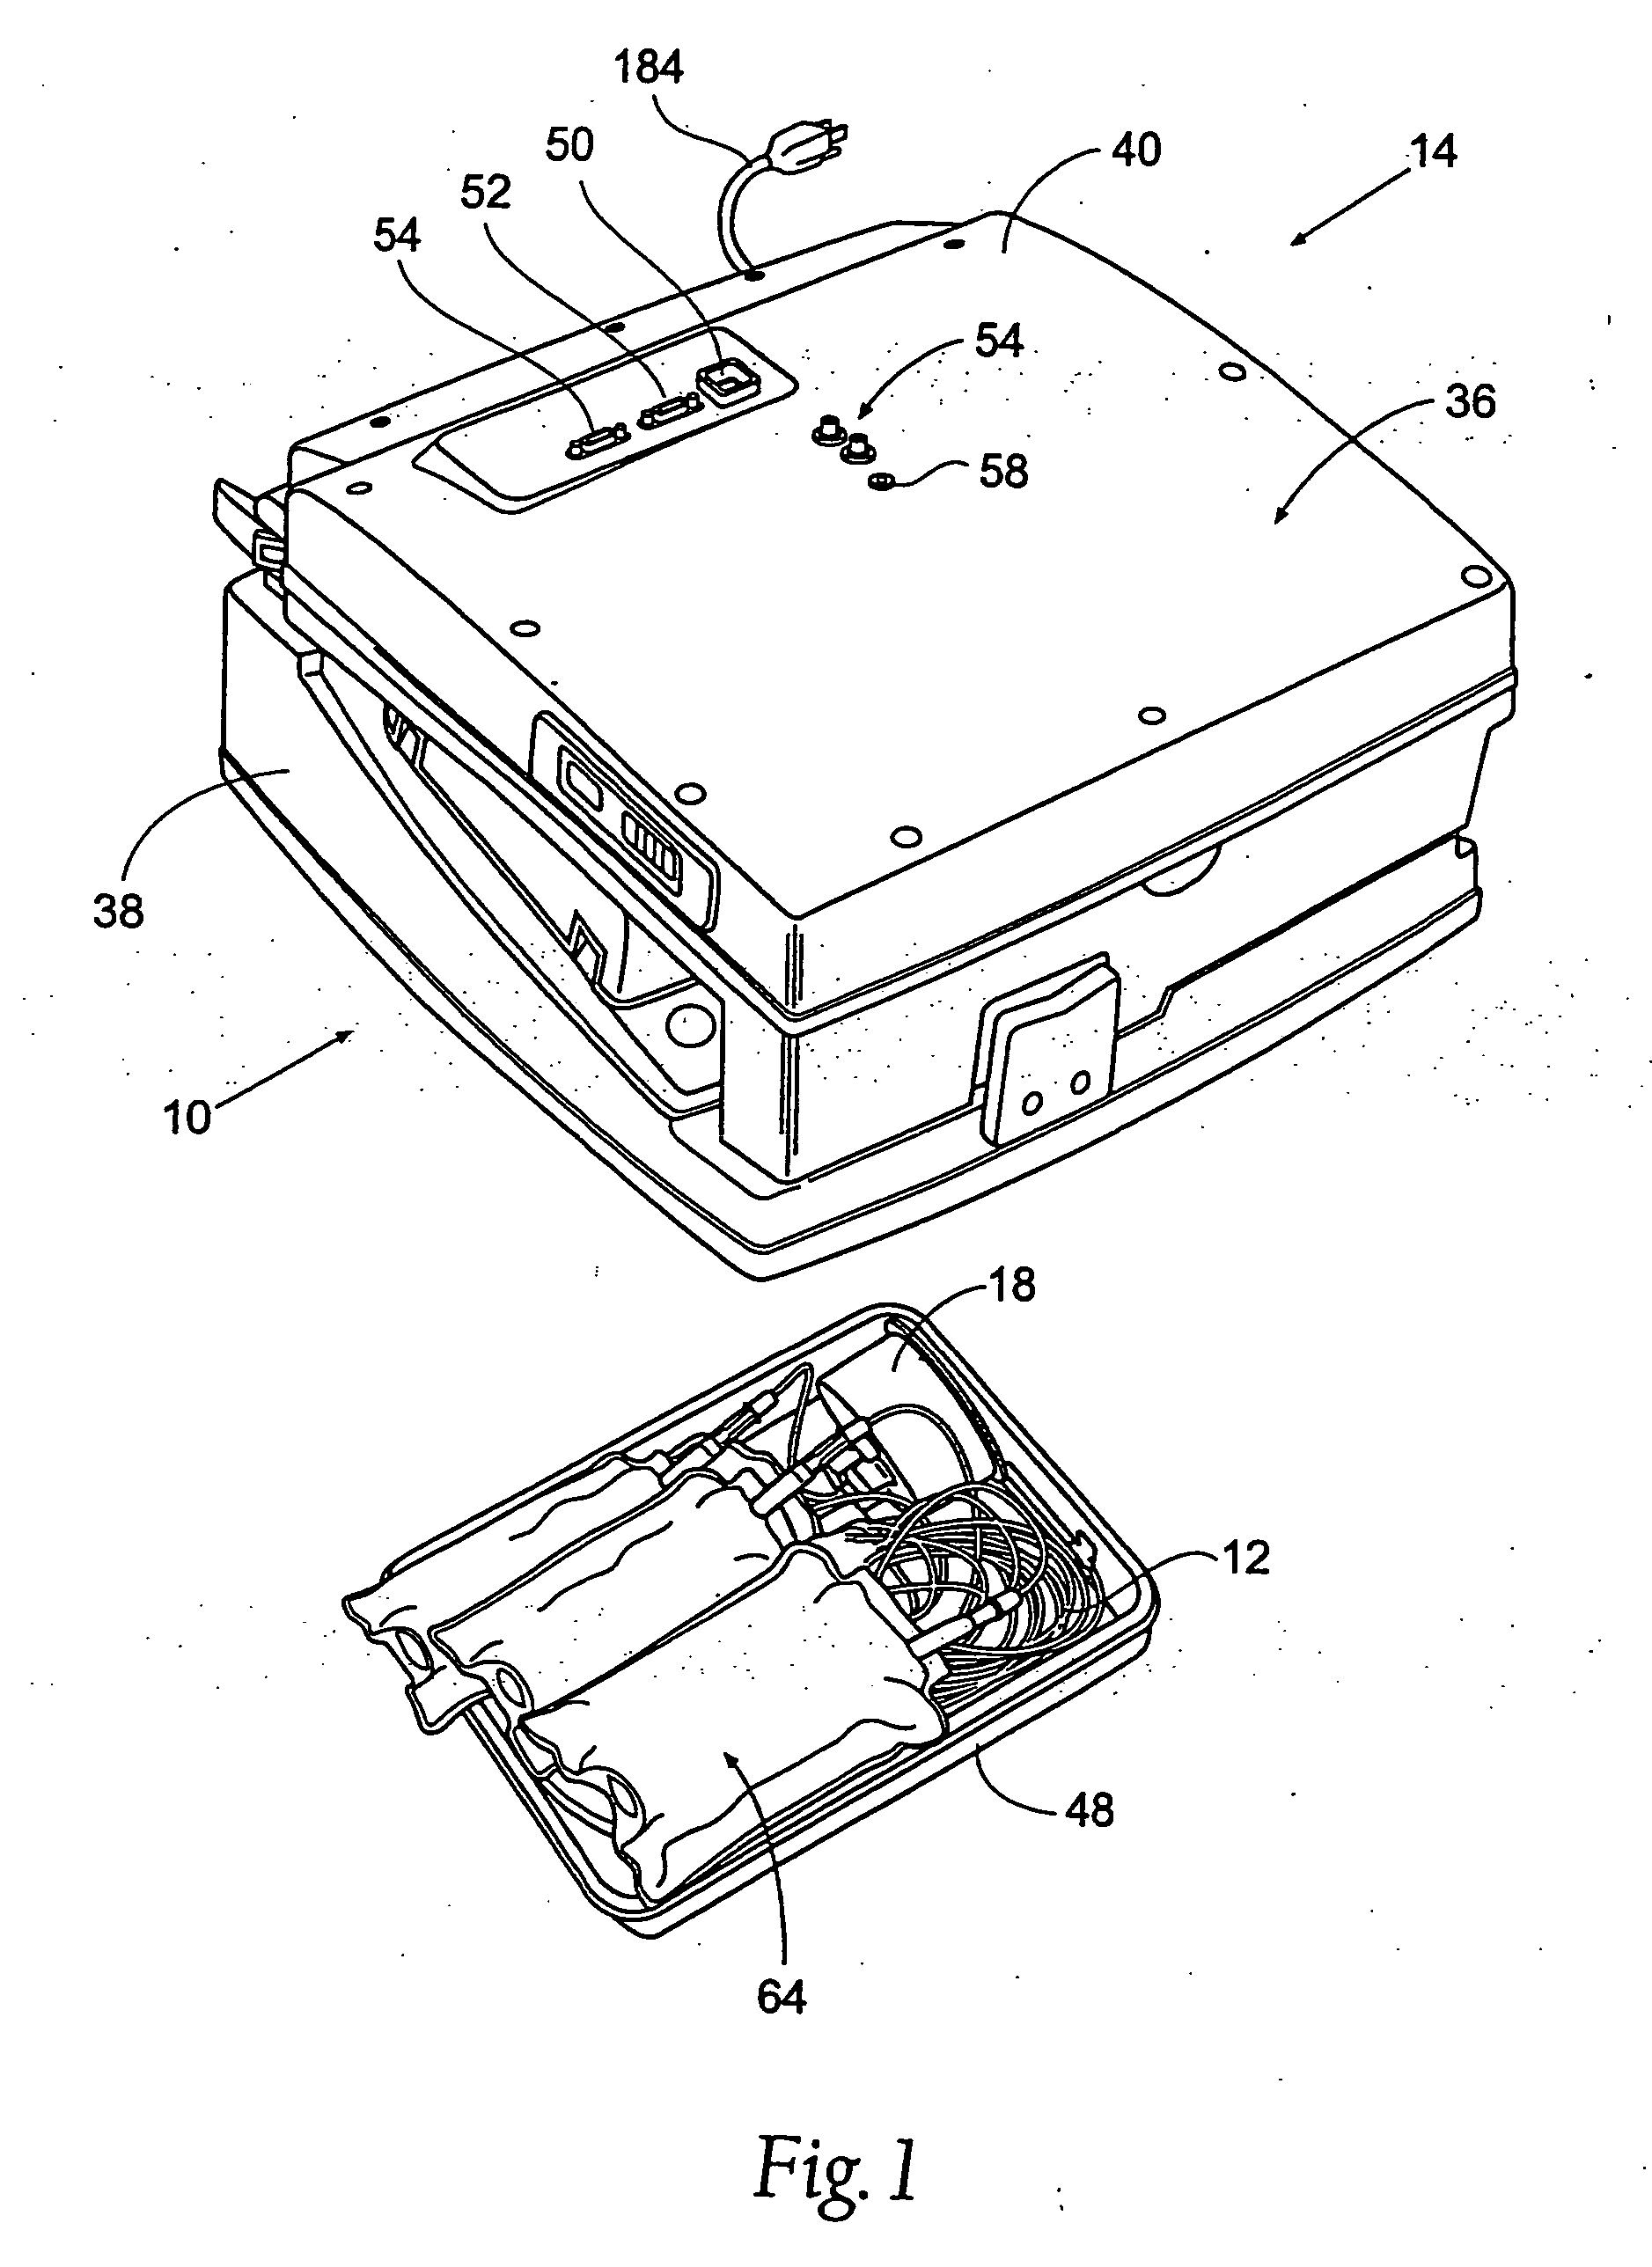 Blood component processing systems and methods using fluid-actuated pumping elements that are integrity tested prior to use